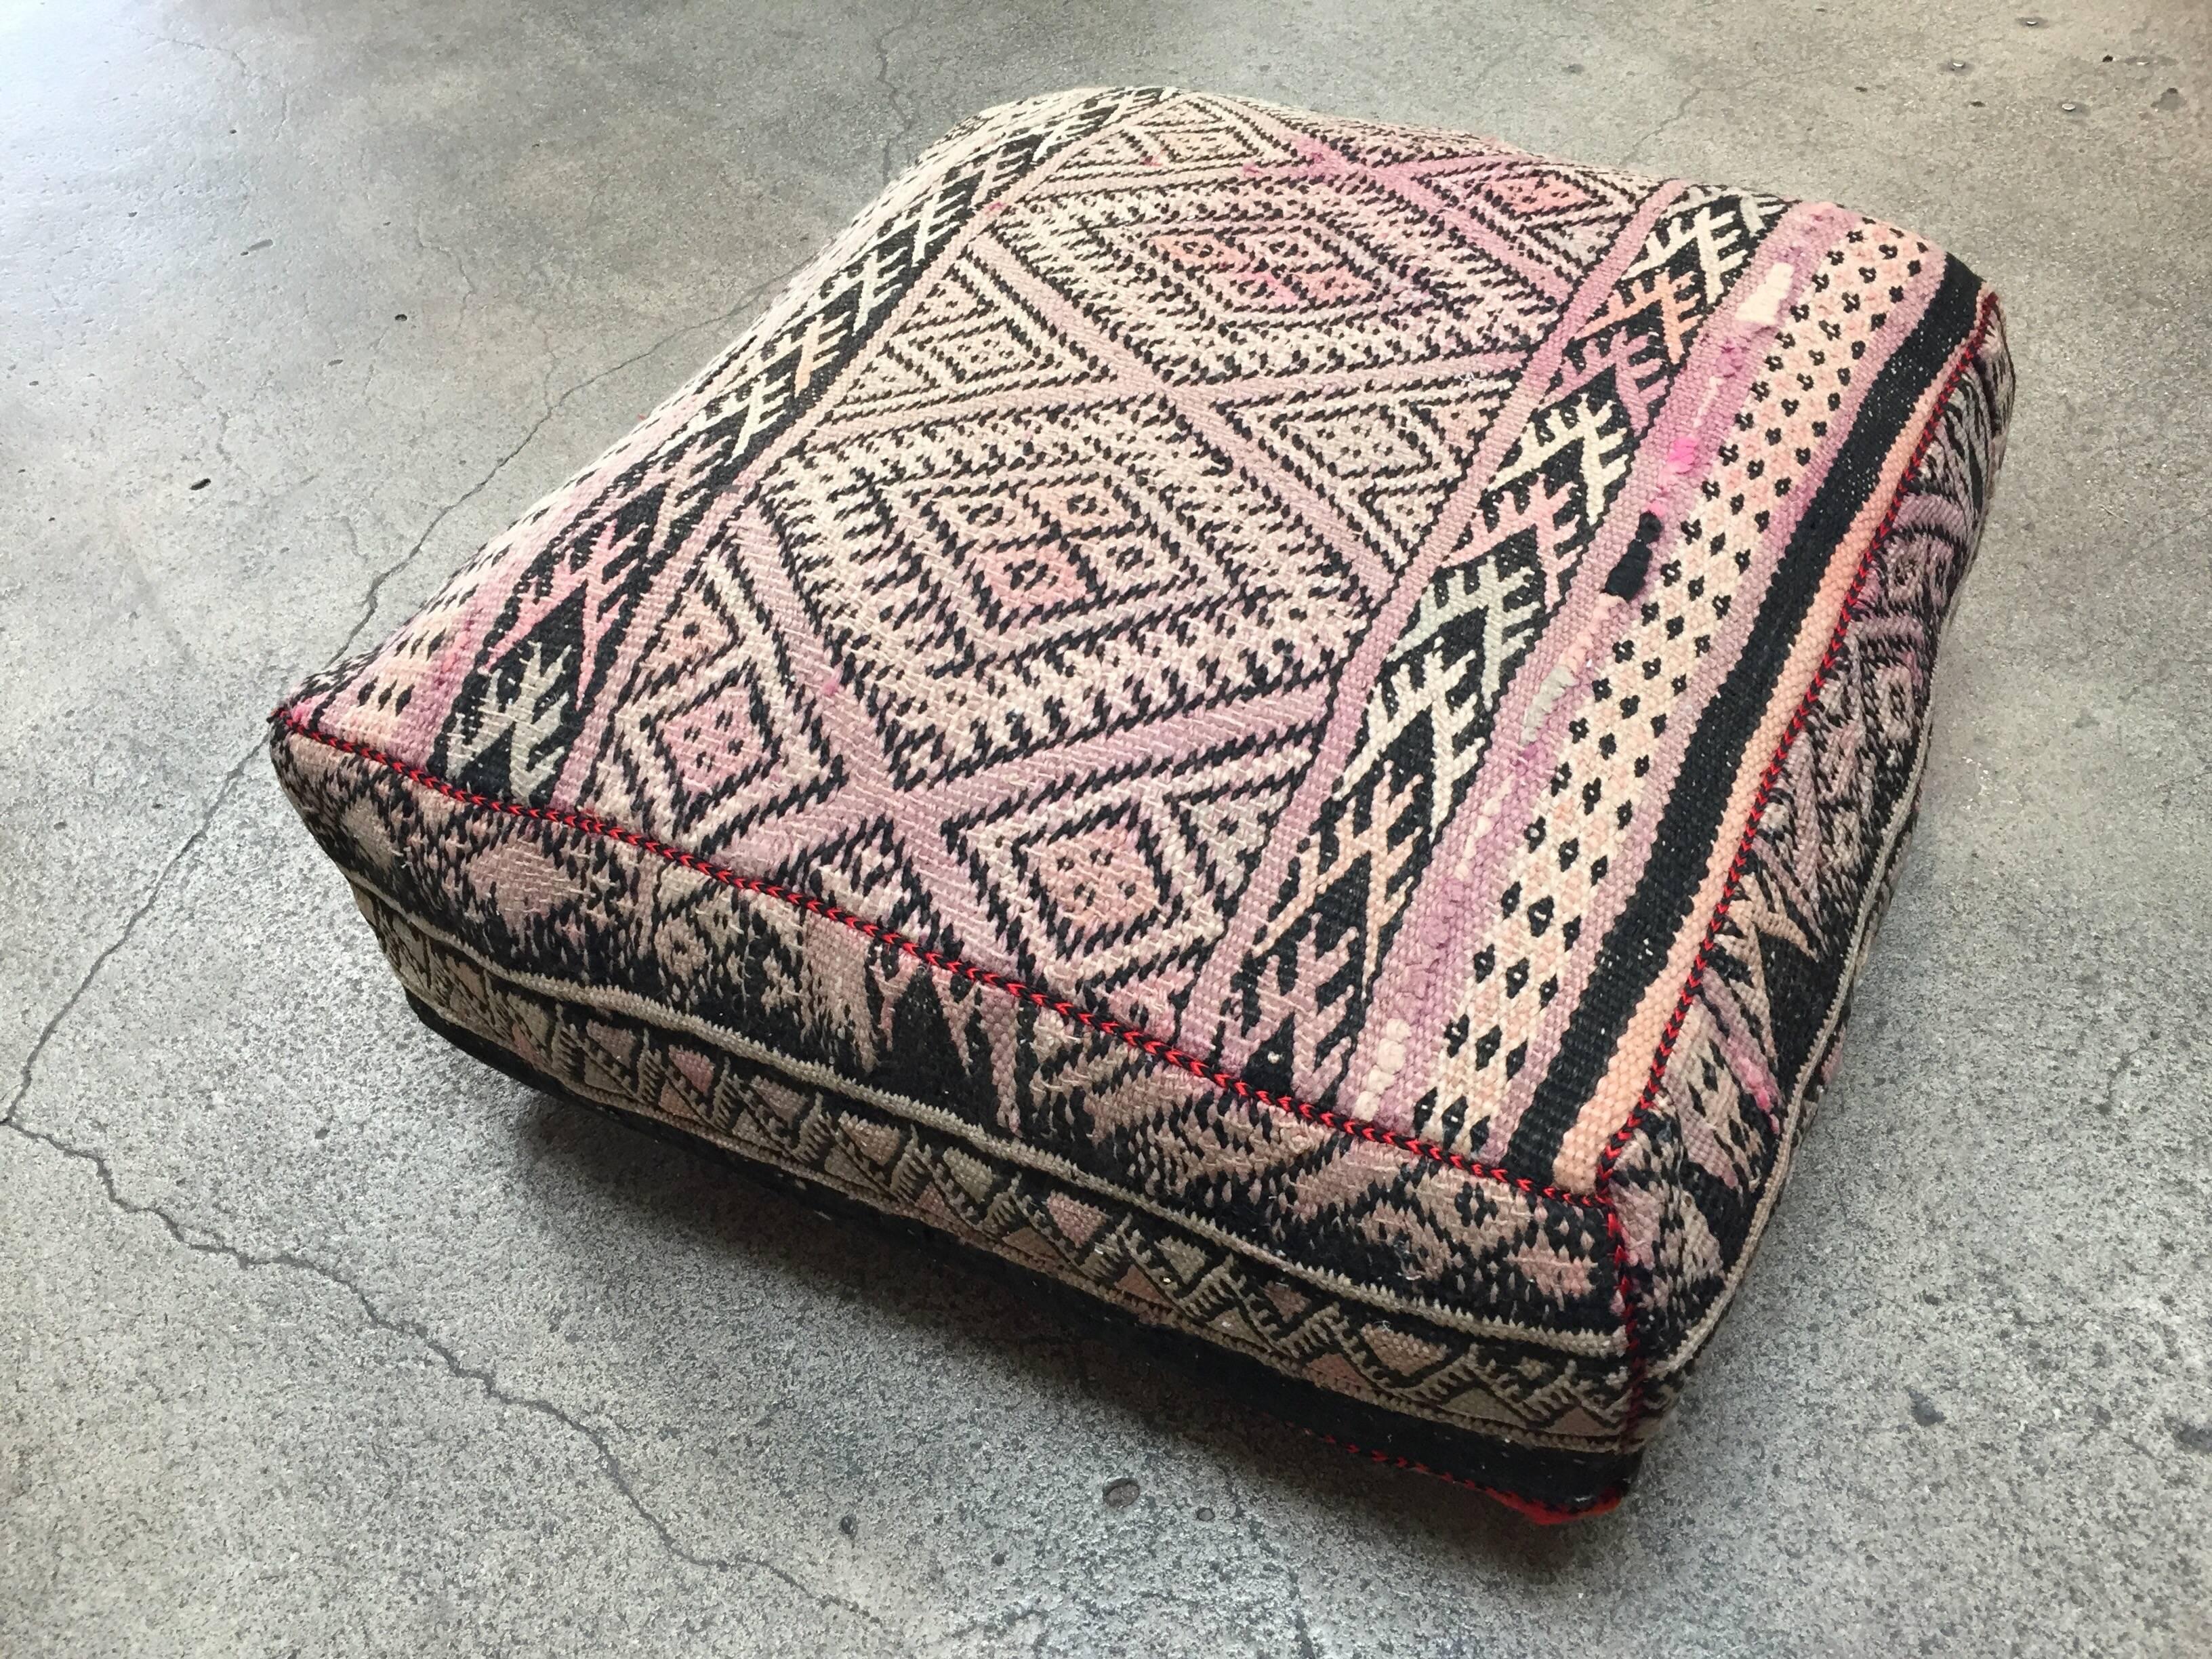 Moroccan vintage floor pillow seat cushion made from a Tribal kilim flat weave Berber rug.
Square shape with nice faded earth tone colors for the top and rich warm stripes colors for the bottom.
Great addition for any Bohemian or Modern